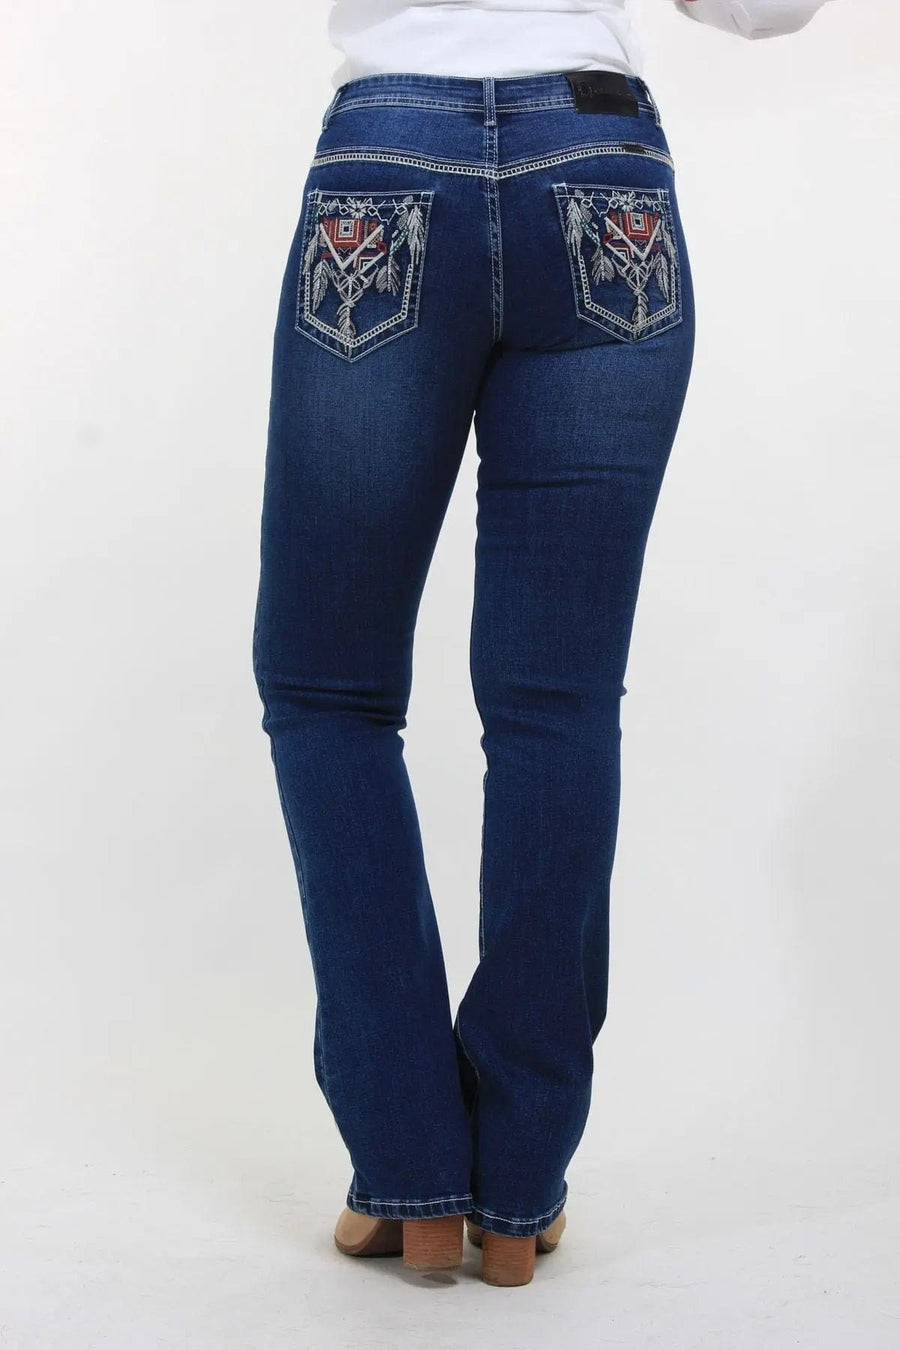 Outback Womens Jeans 10X34 Outback Jeans Womens Brandy Bling (OBW211120)